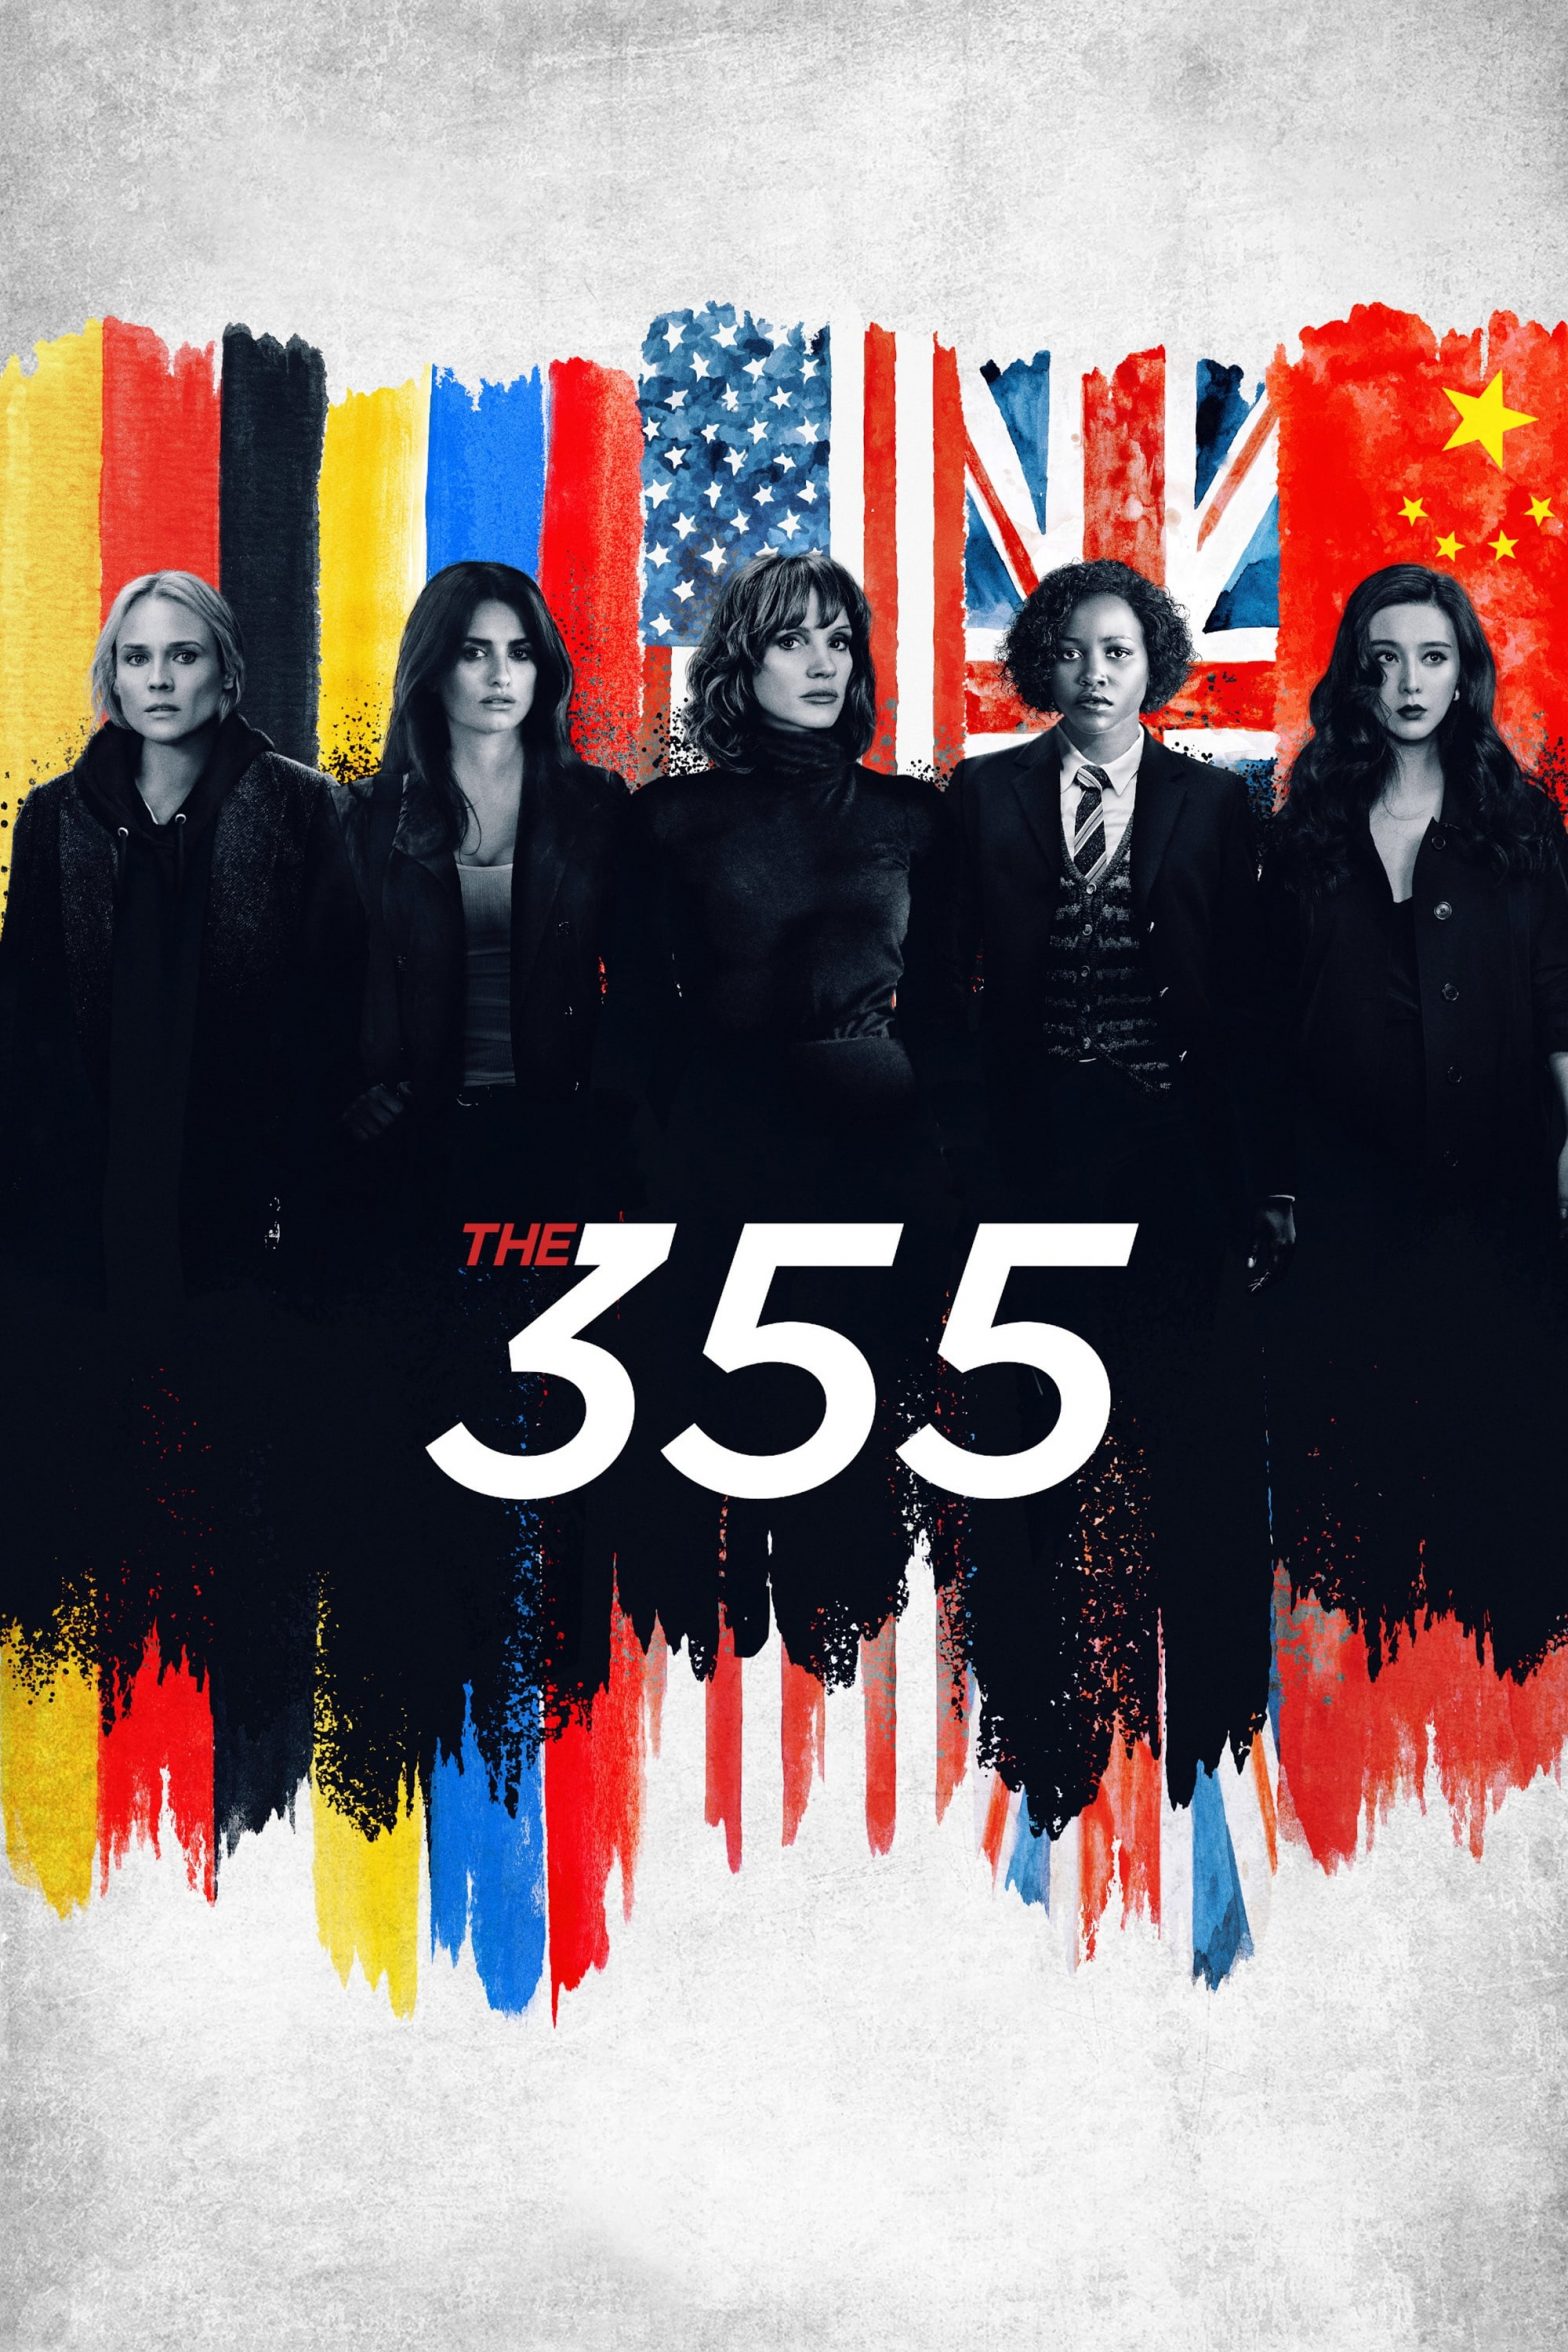 Poster for the movie "The 355"